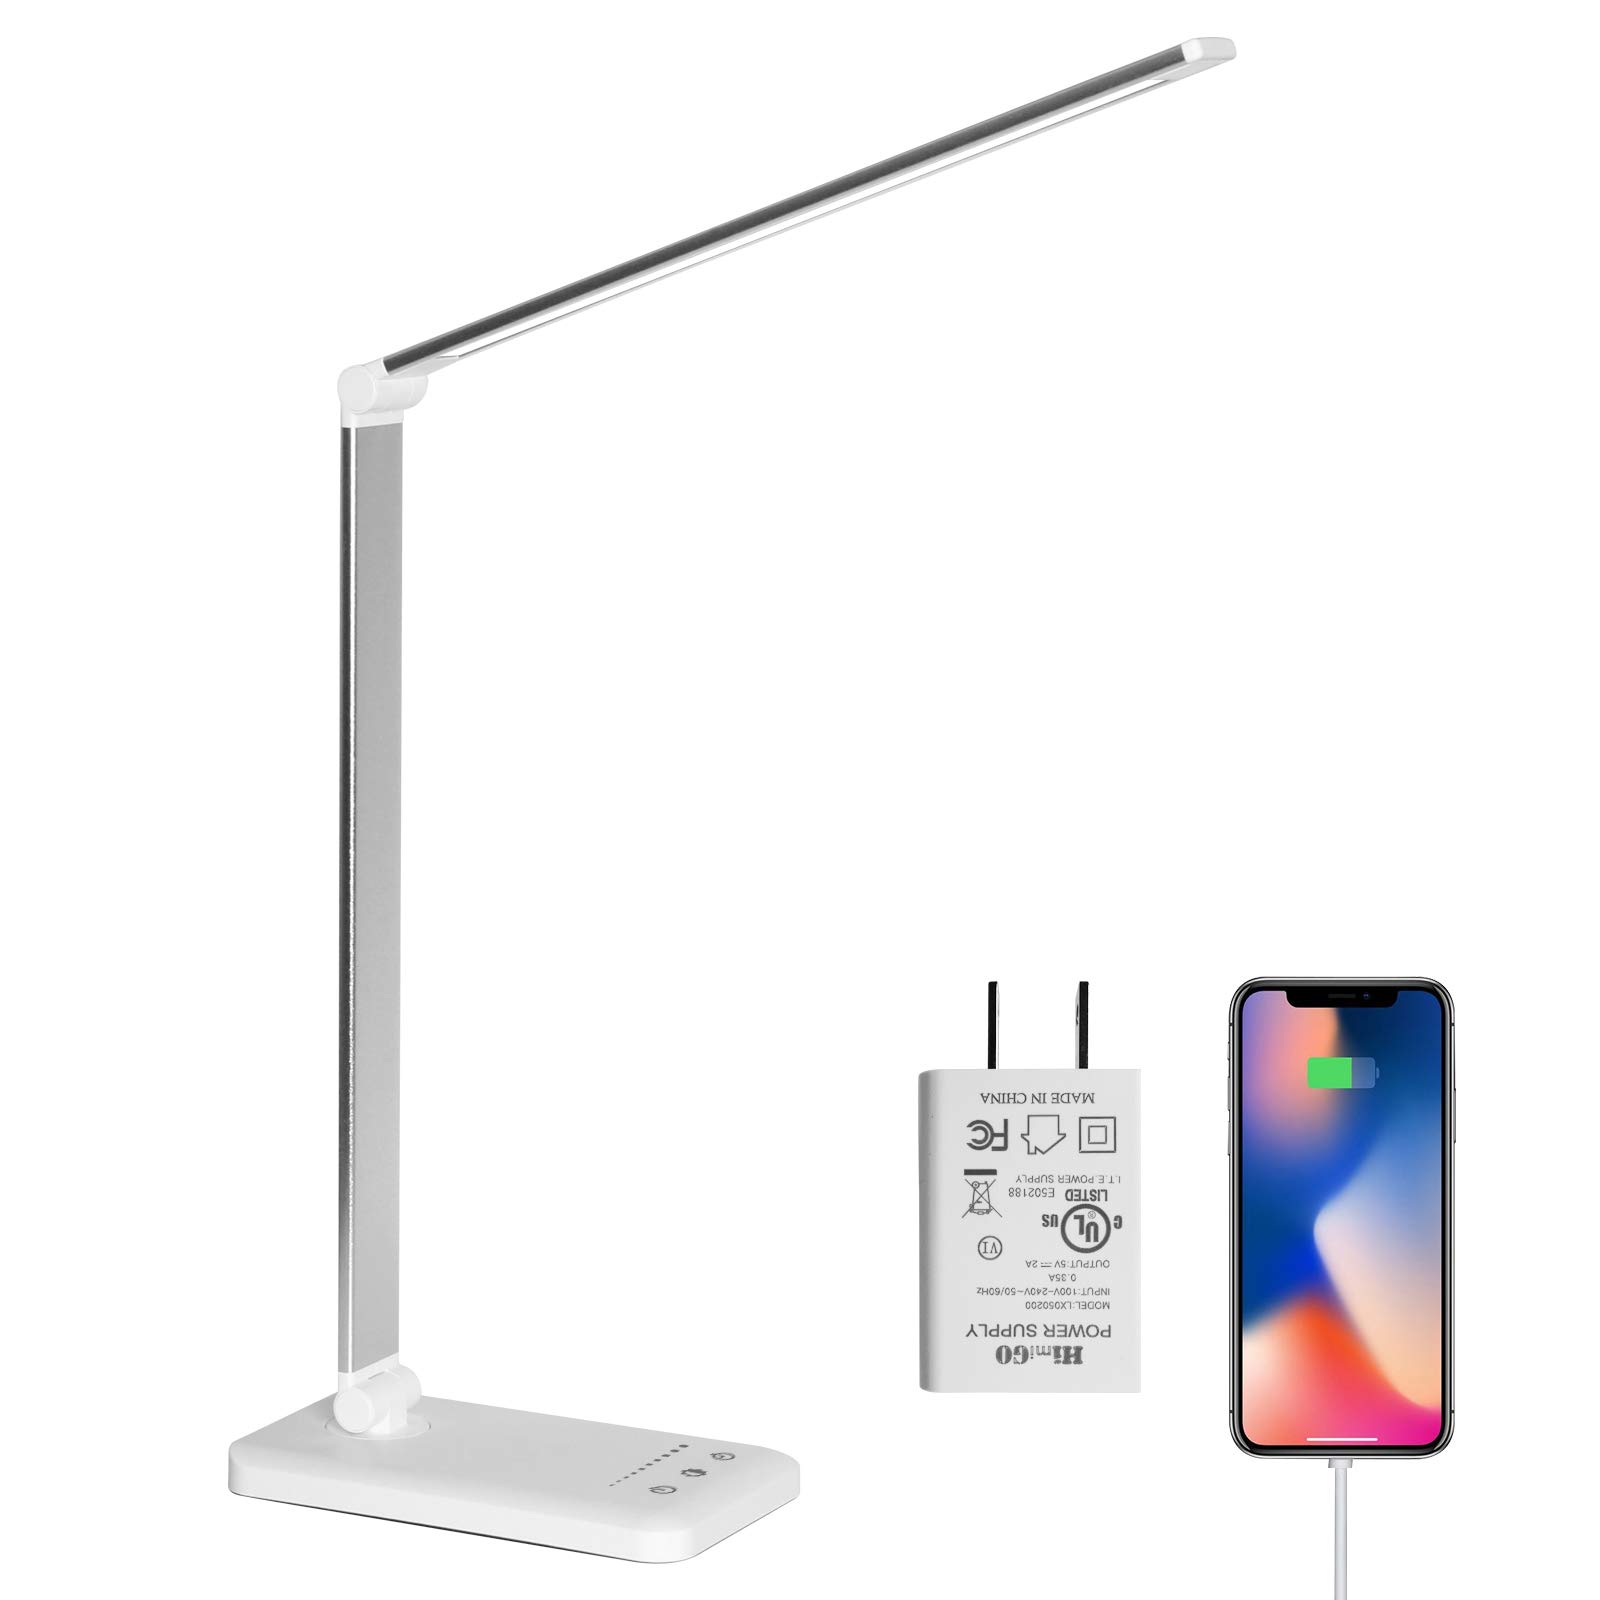 Is LED table lamp good for eyes?